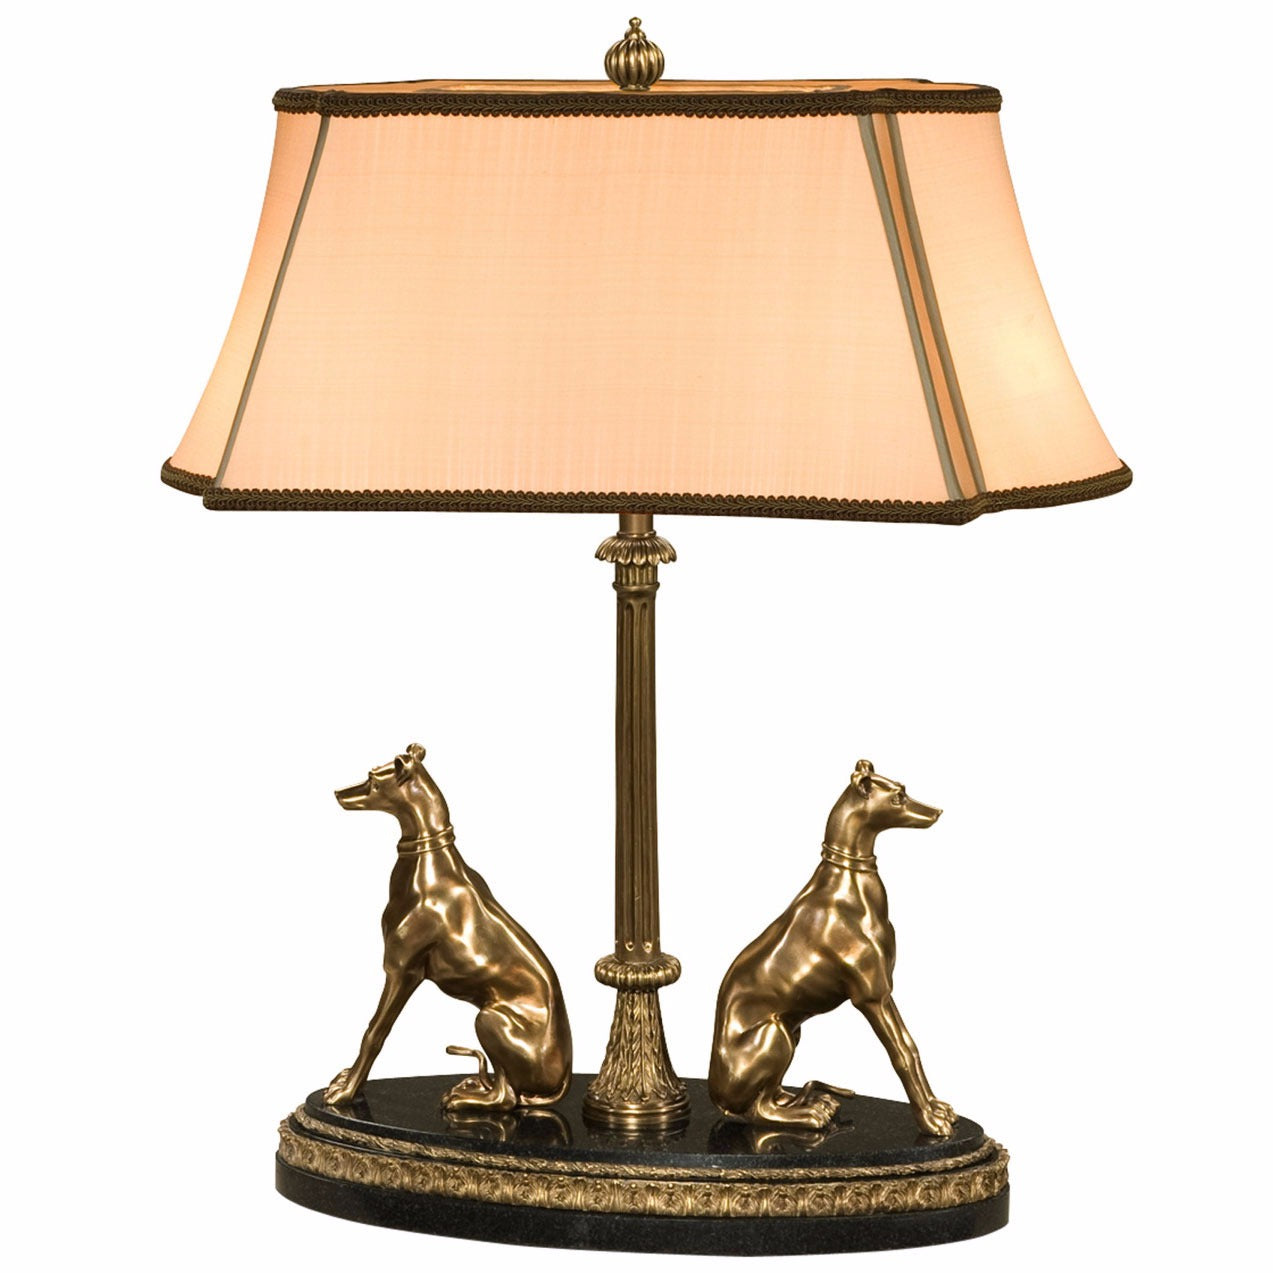 Brass dogs table lamp